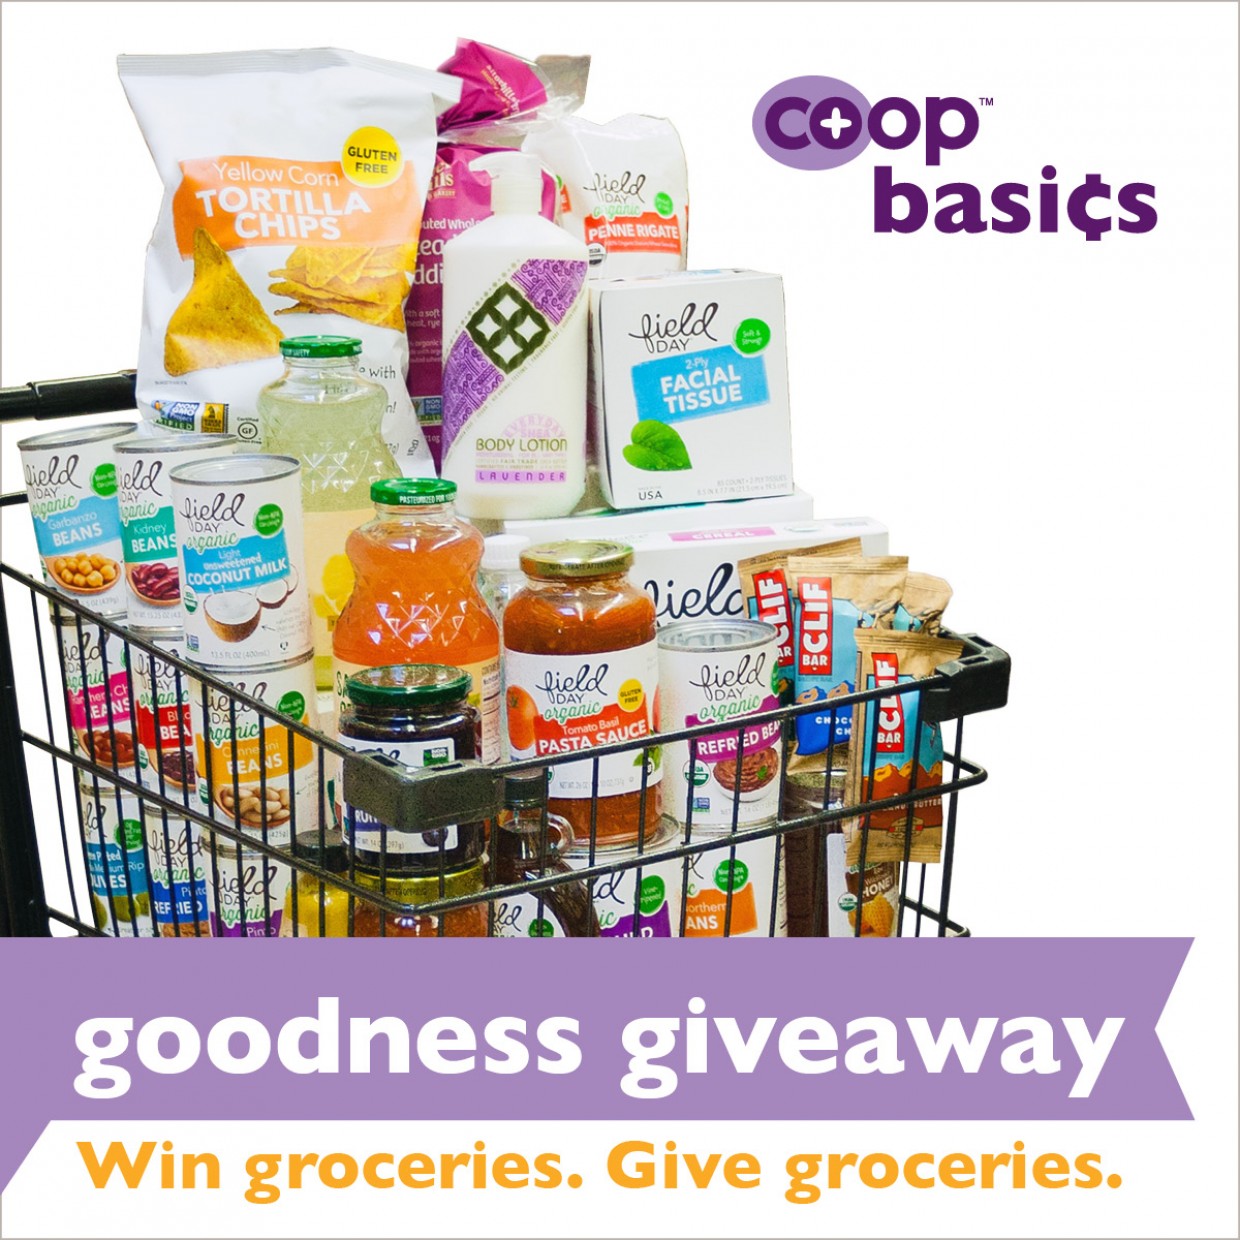 Win Groceries, Give Groceries!